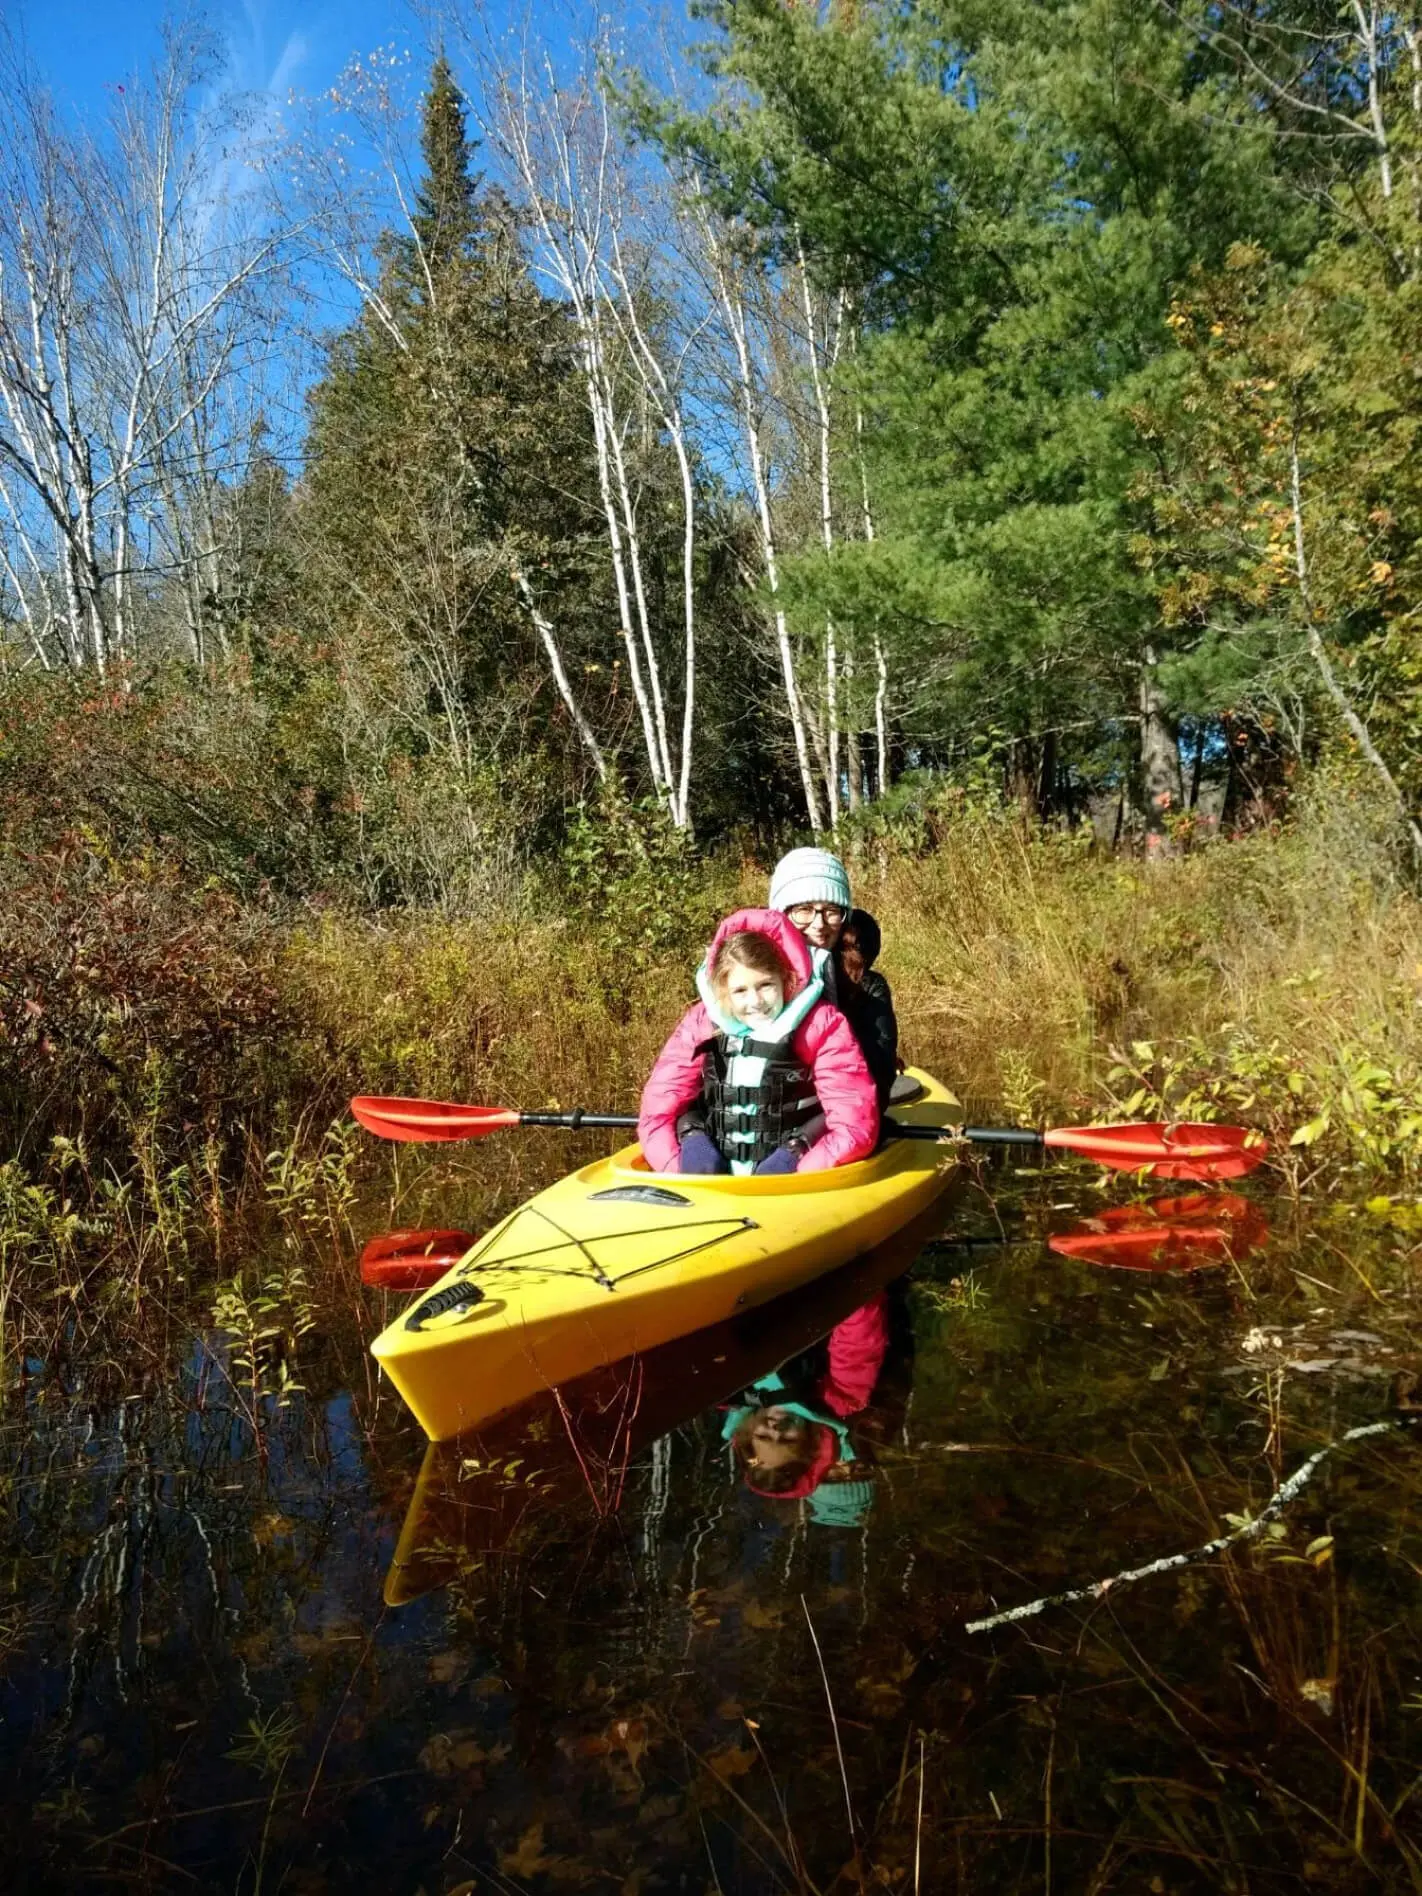 Fabric employee Glenda with her daughter in a kayak on a company-wide bonding day.